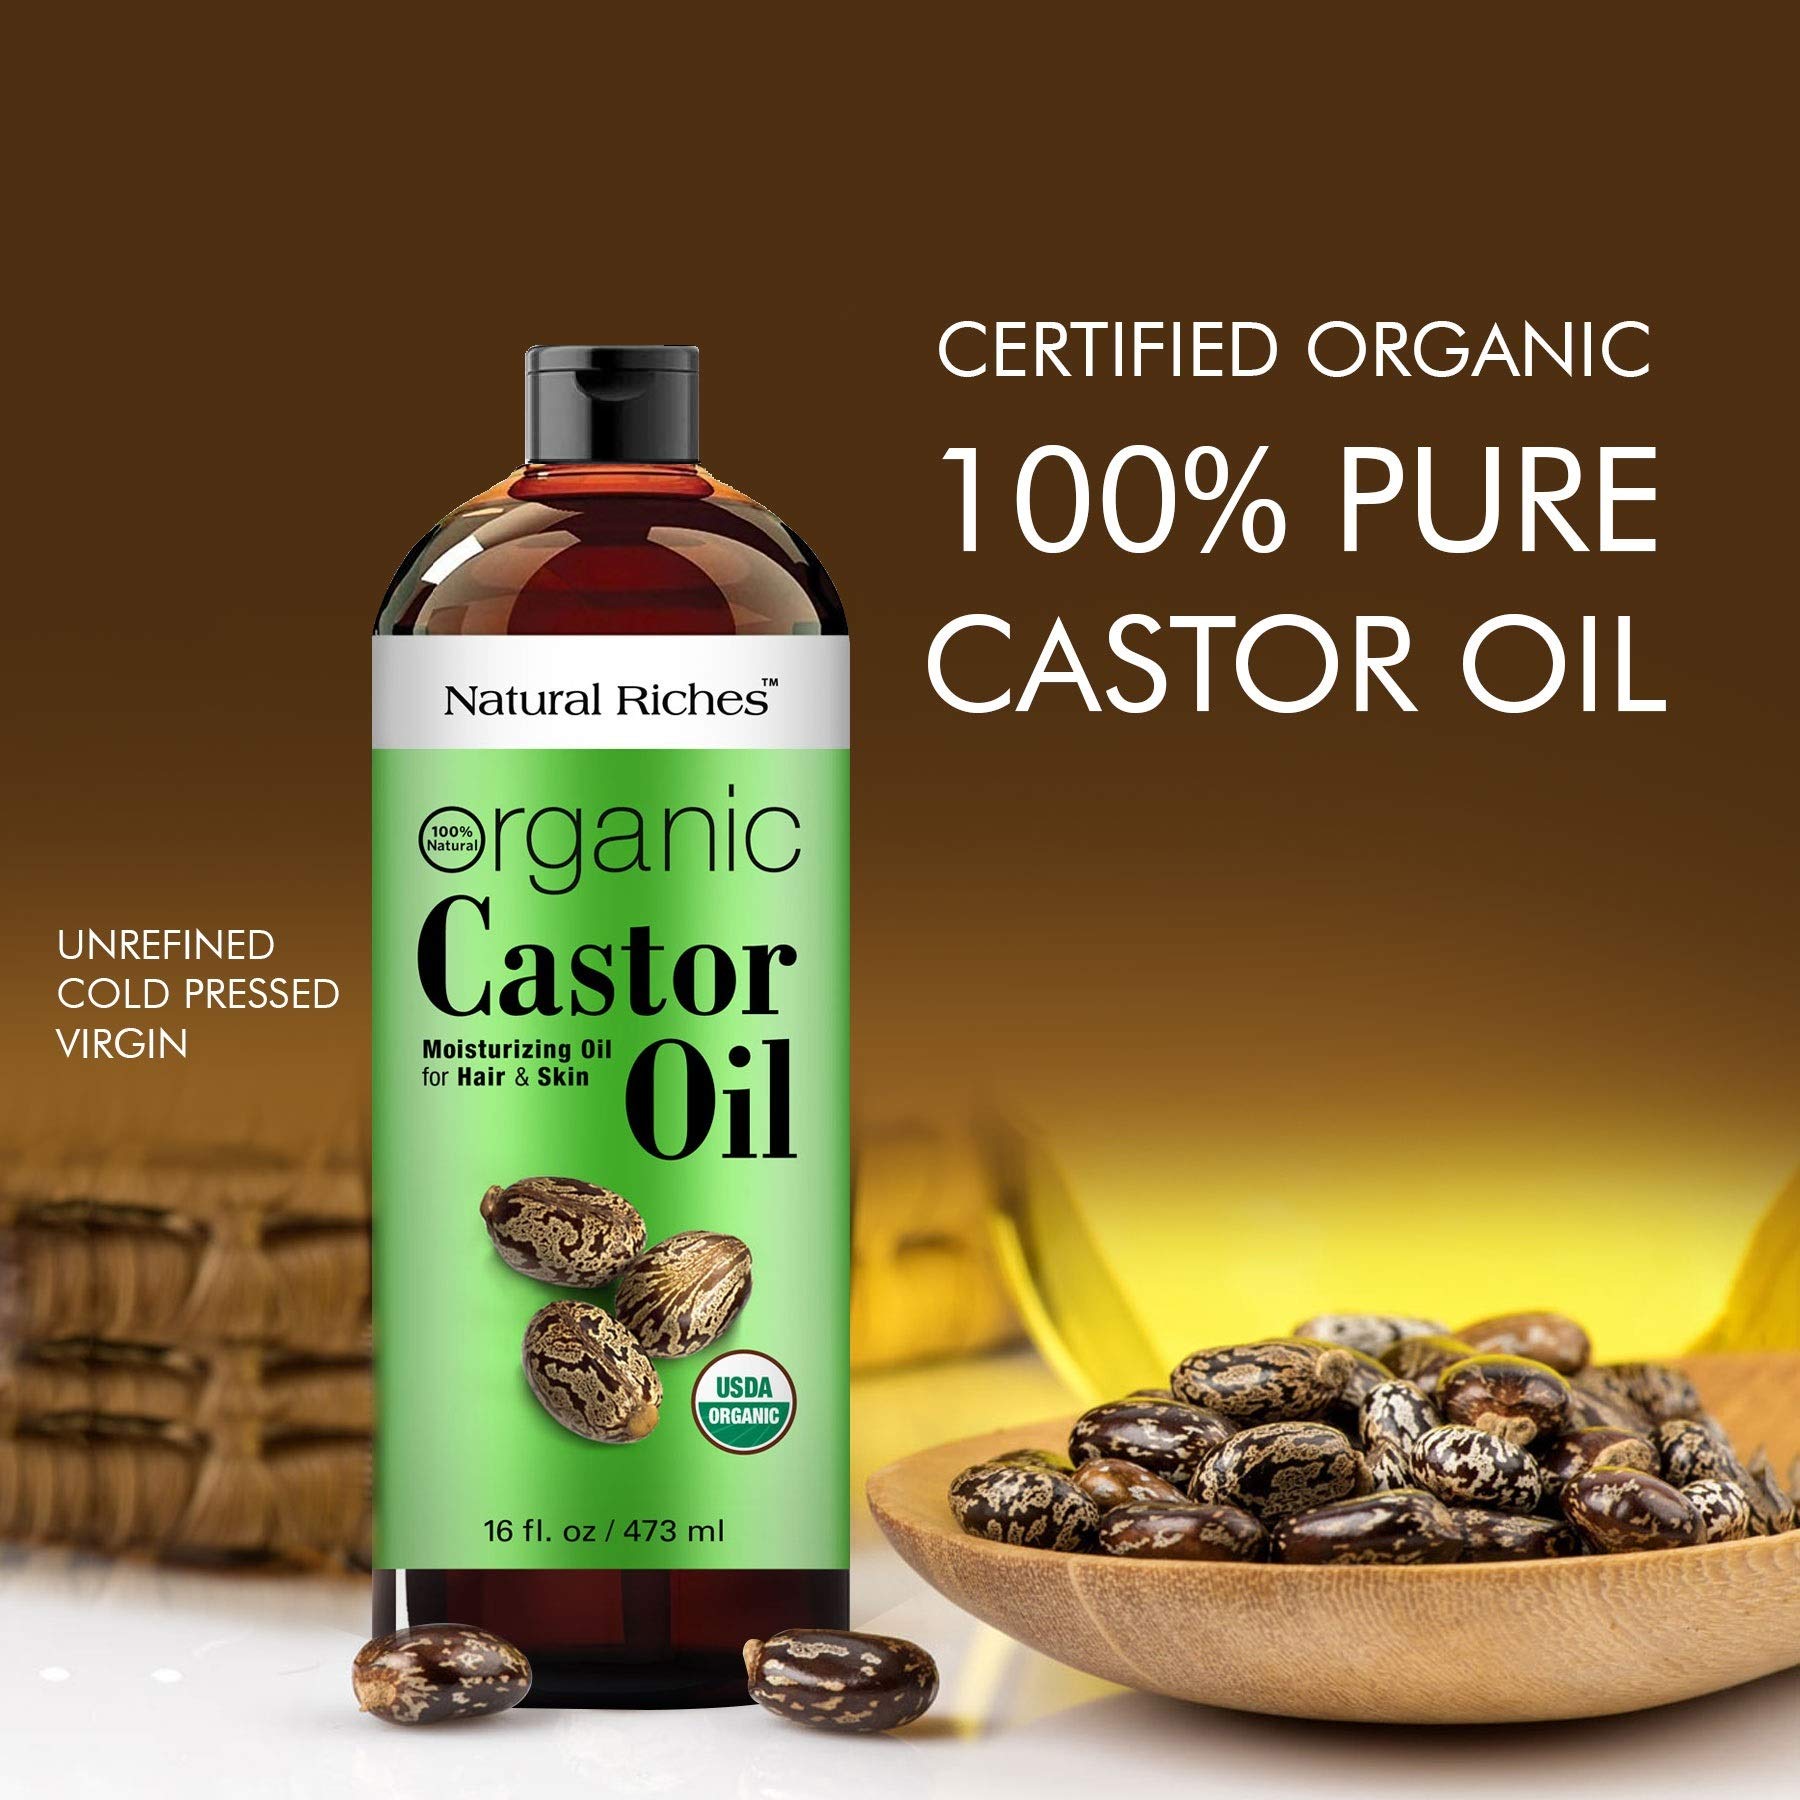 Natural Riches Organic Castor Oil Cold pressed USDA certified for Dry Skin Hair Loss Dandruff Thicker Hair - Moisturizes heals Scalp Skin Hair growth Thicker Eyelashes & Eyebrows 16 fl. oz.